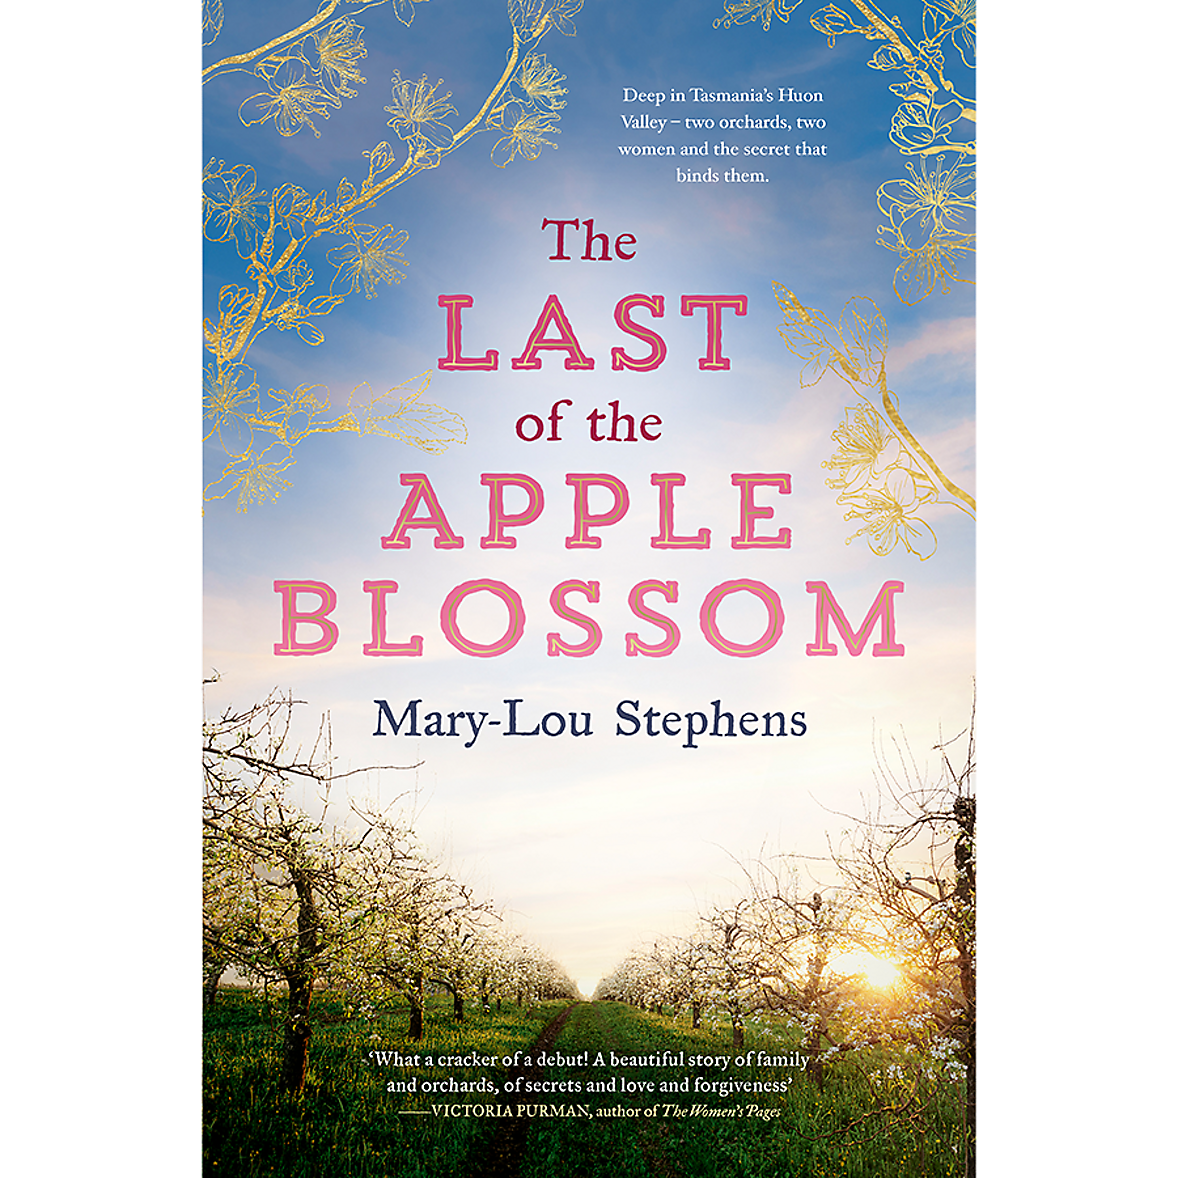 The Last of the Apple Blossom by Mary-Lou Stephens